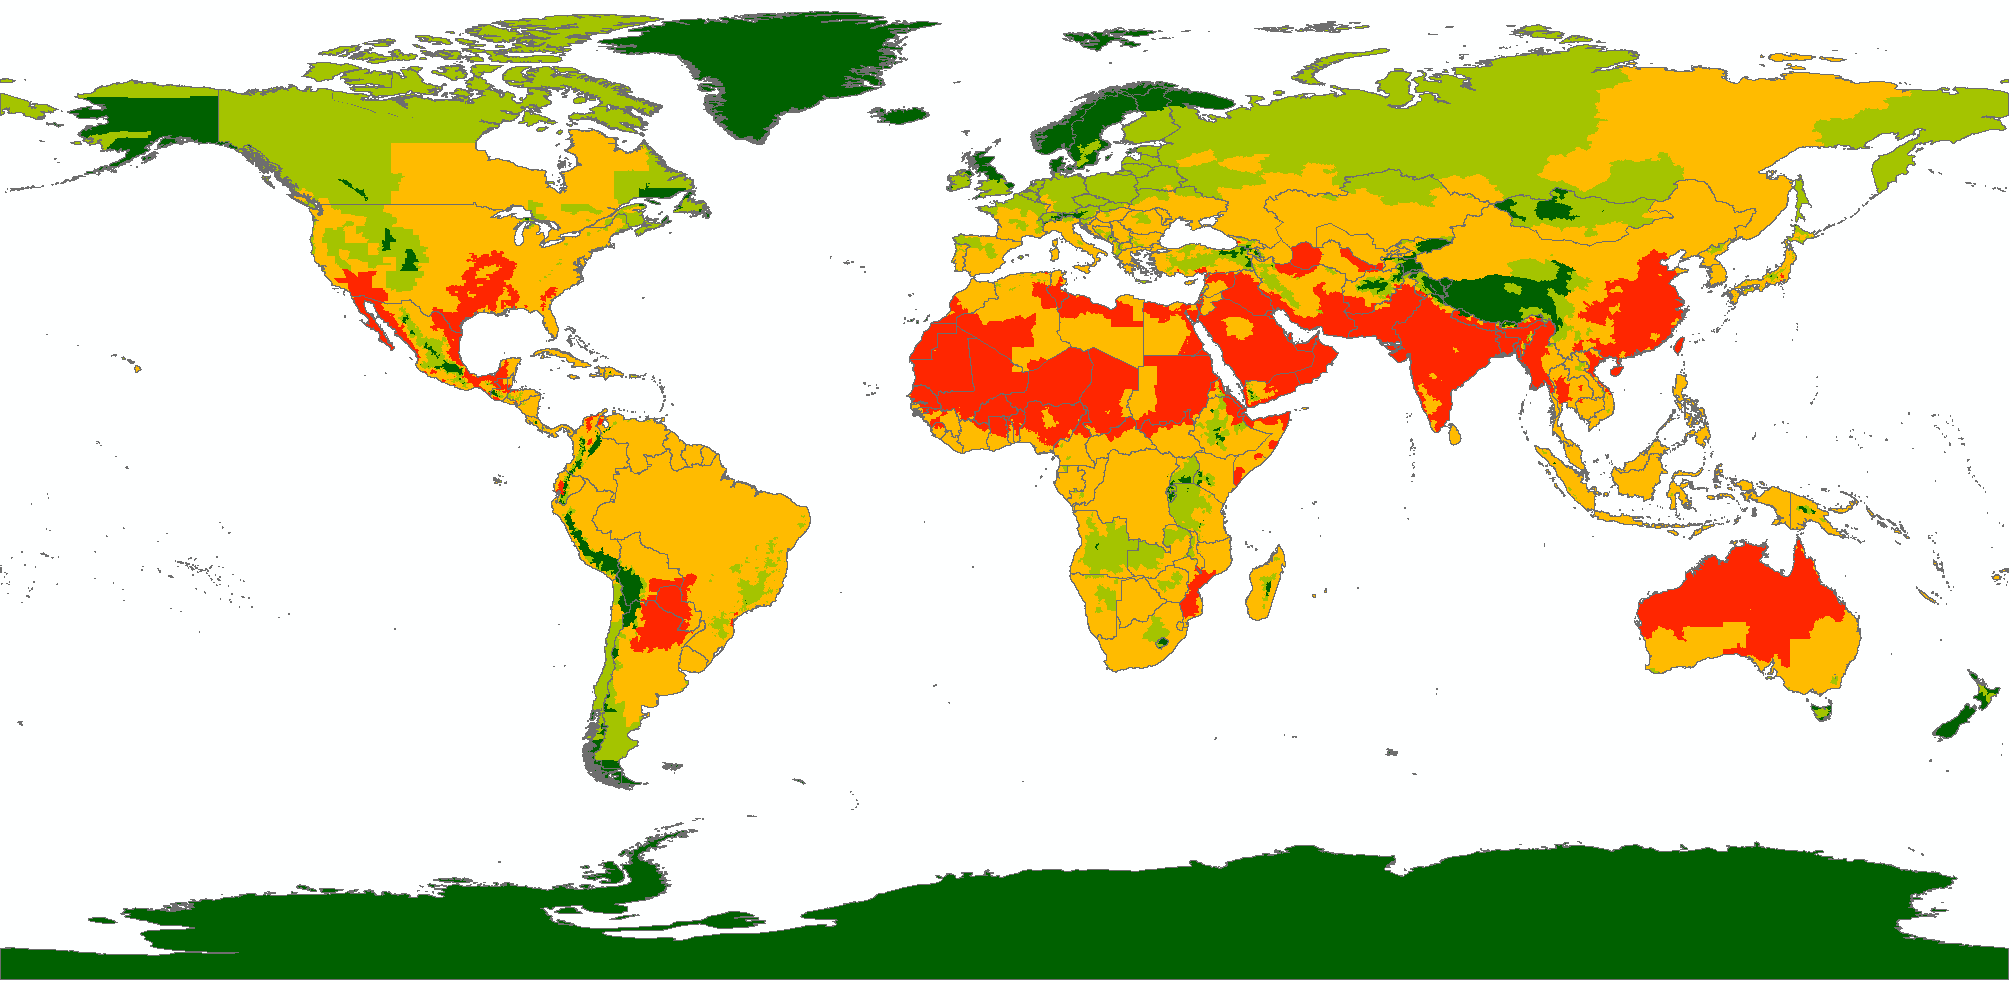 Heat hazard classification map at the ADM2-level. The figure visualizes the location with very low (dark green), low (green), medium (orange) and high (red) extreme heat risk